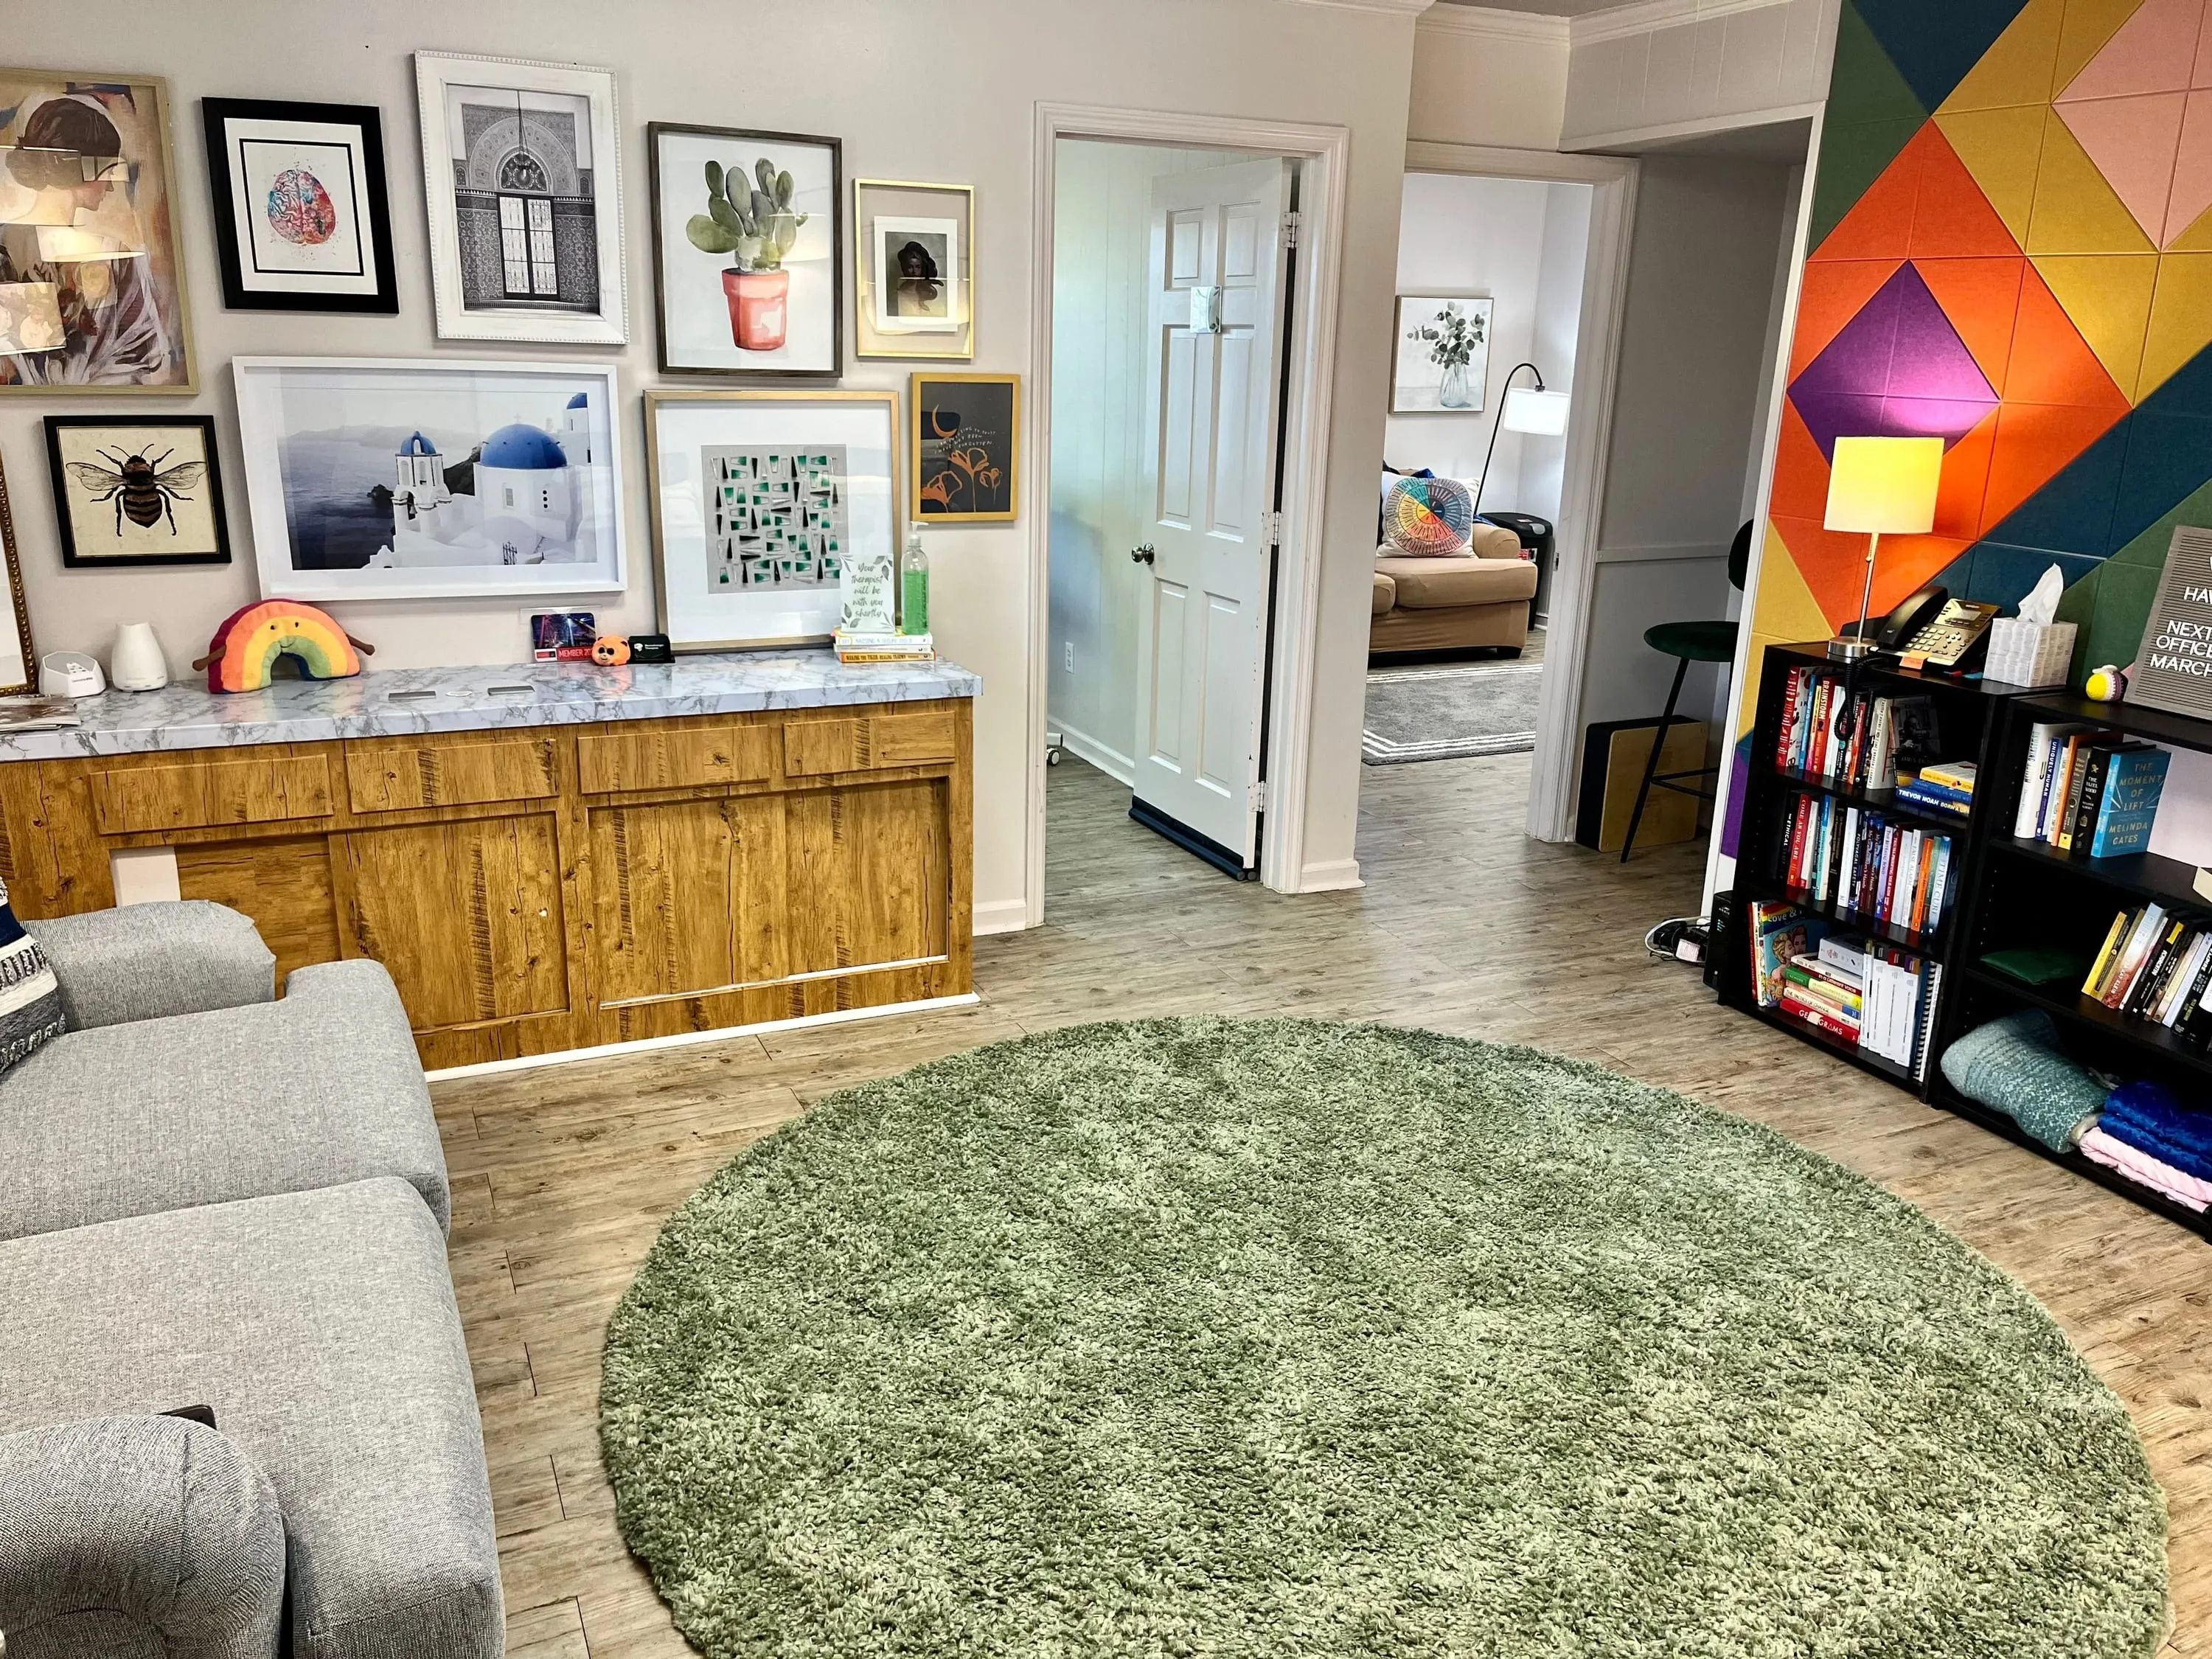 picture of office from entry door; waiting room with collage photo wall, gray couch to left, green circle rug, black bookshelves on right wall. There are two offices